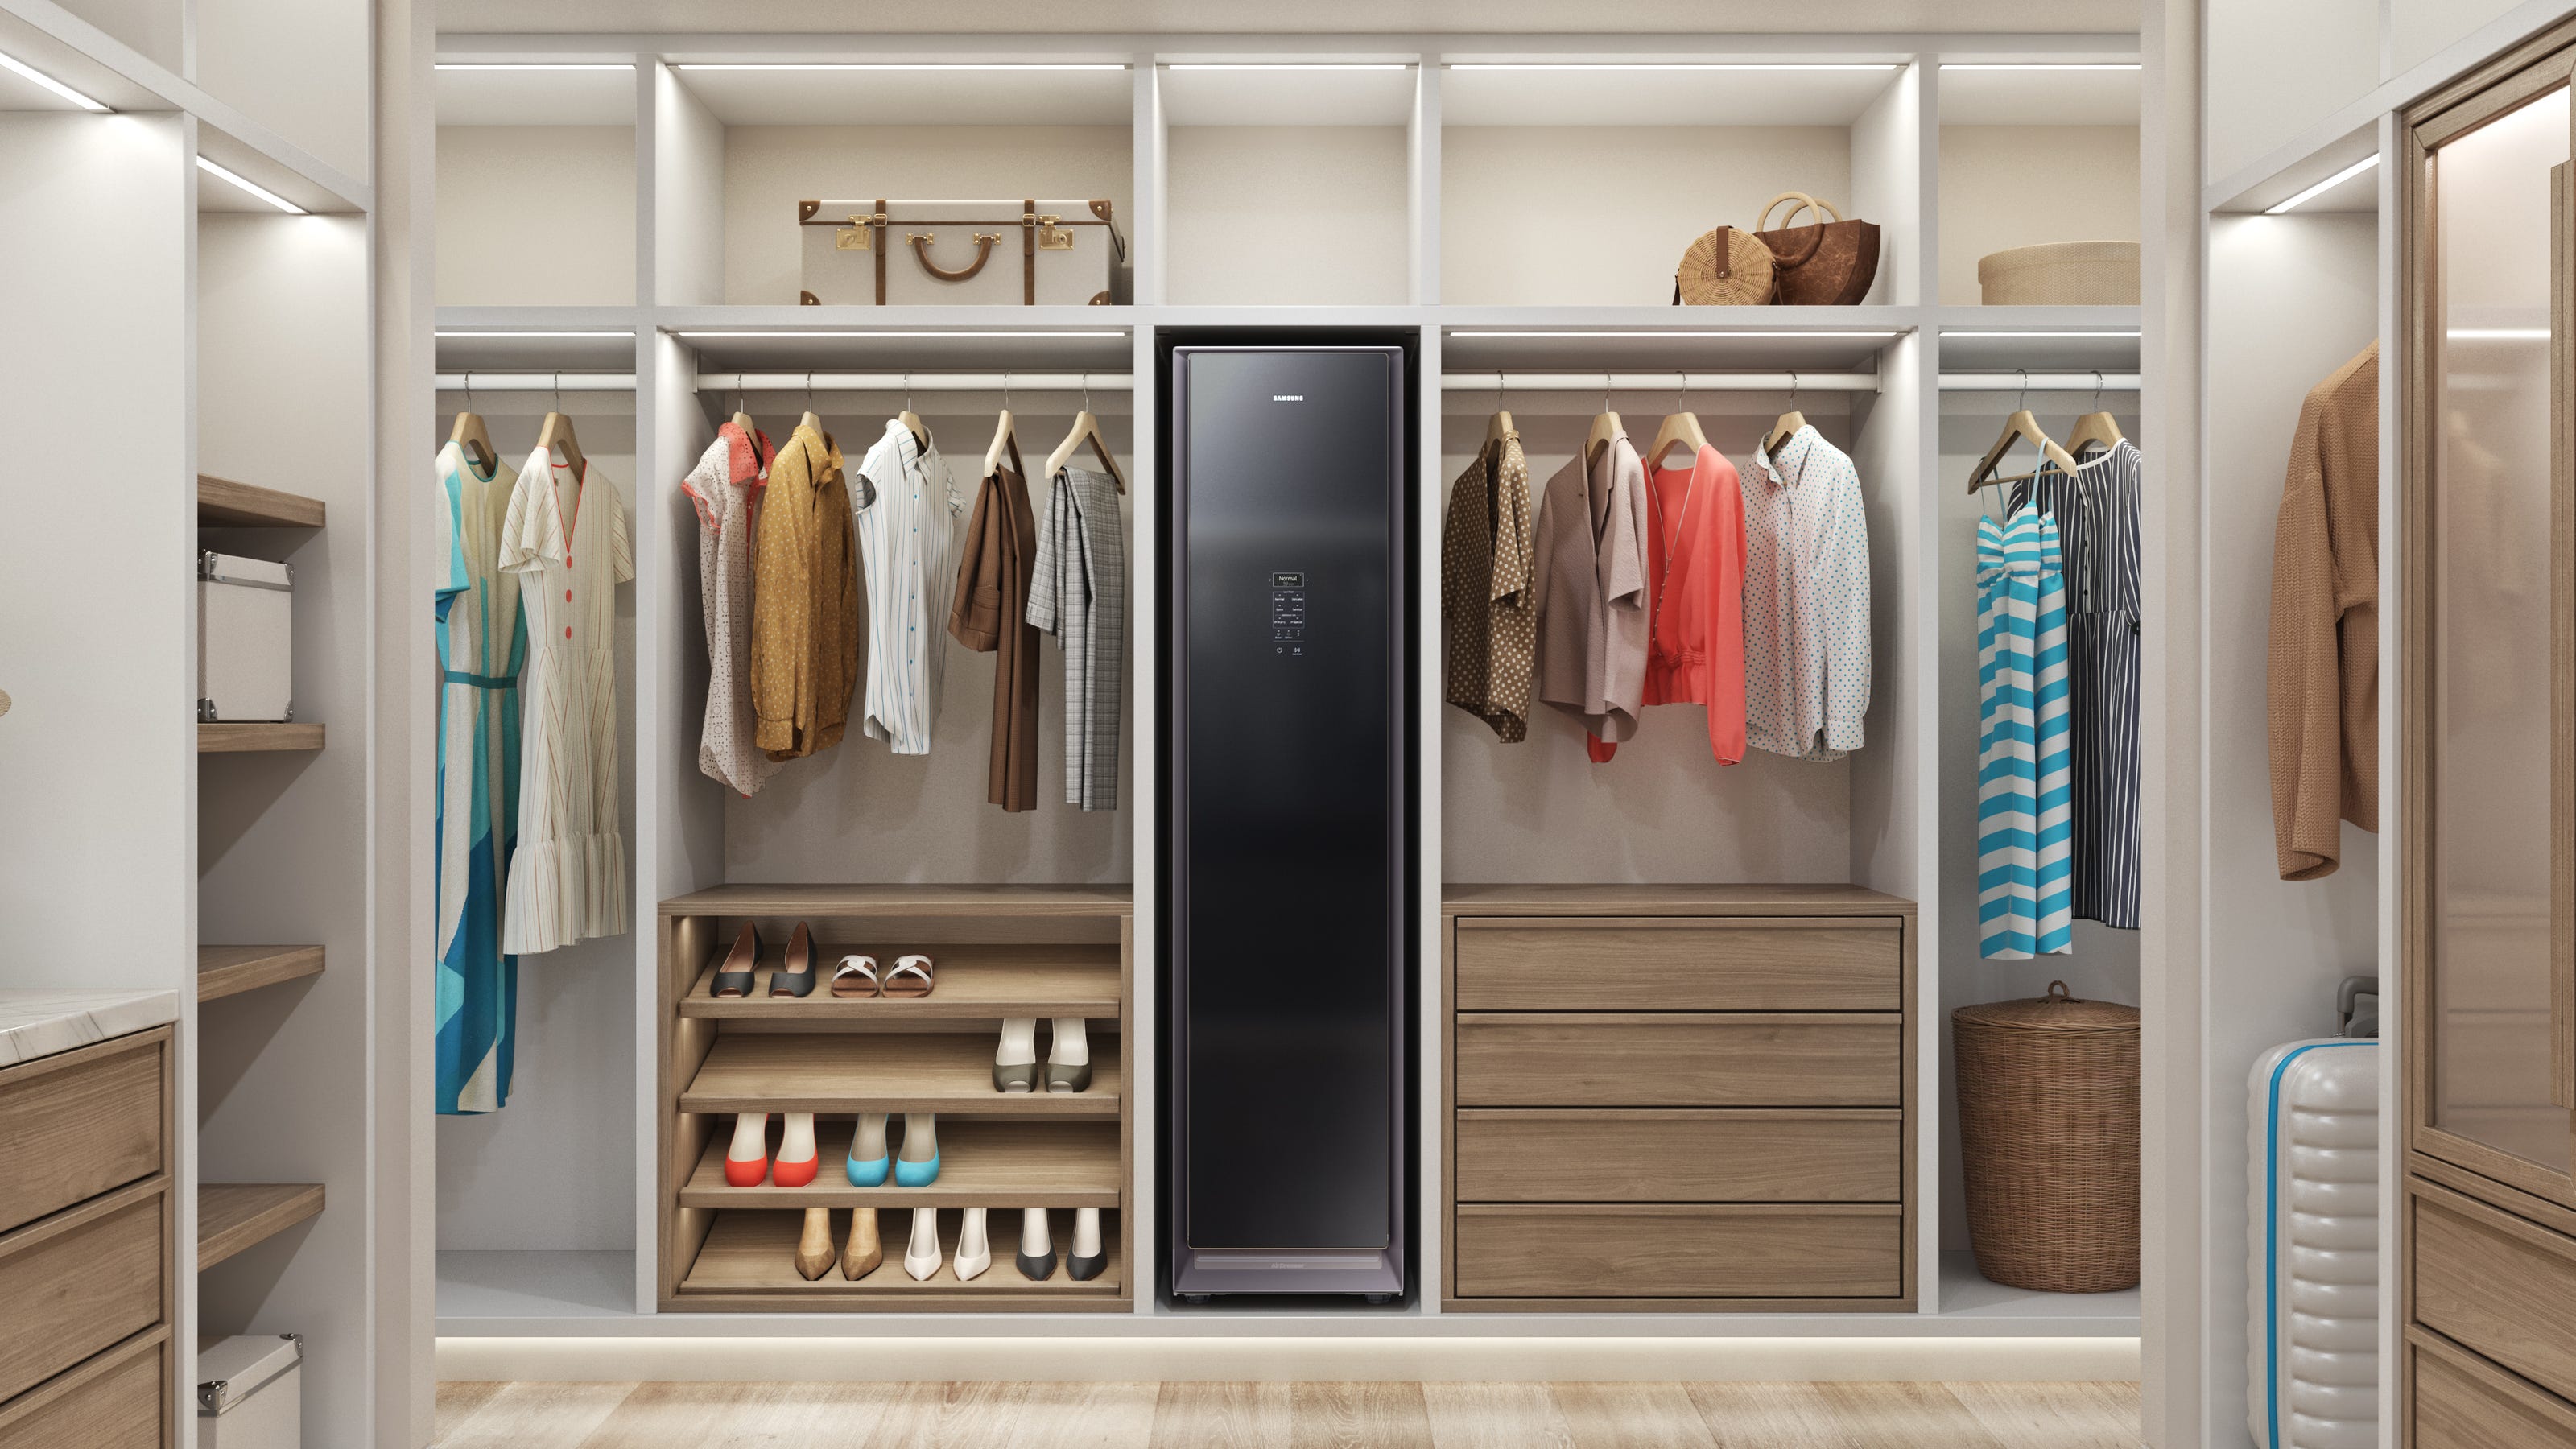 Samsung's AirDresser is a smart closet that steams, disinfects clothes